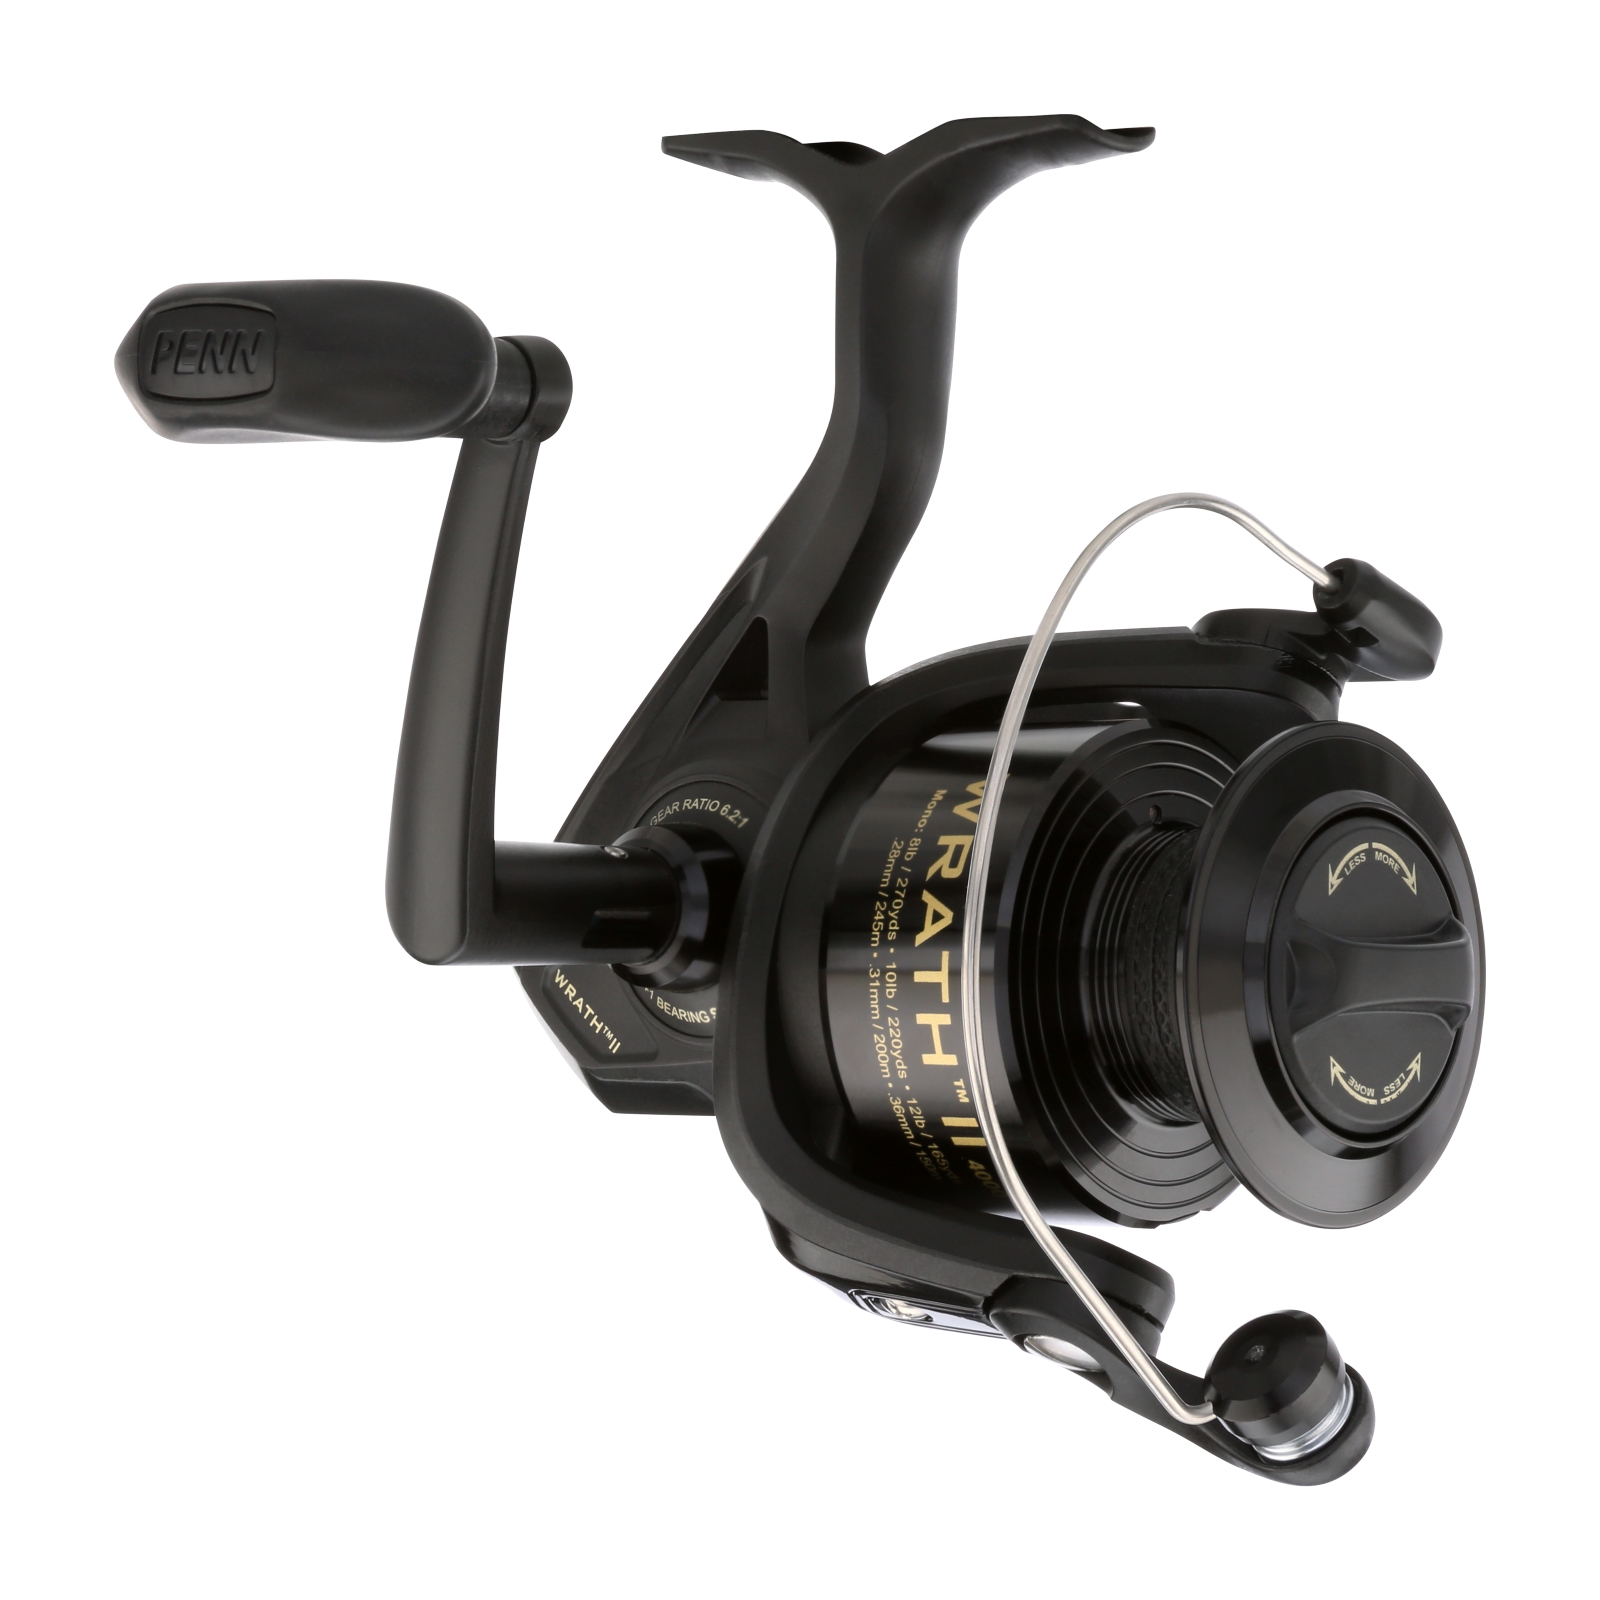 PENN Wrath II Spinning Reel & Combo Now Features the Classic PENN